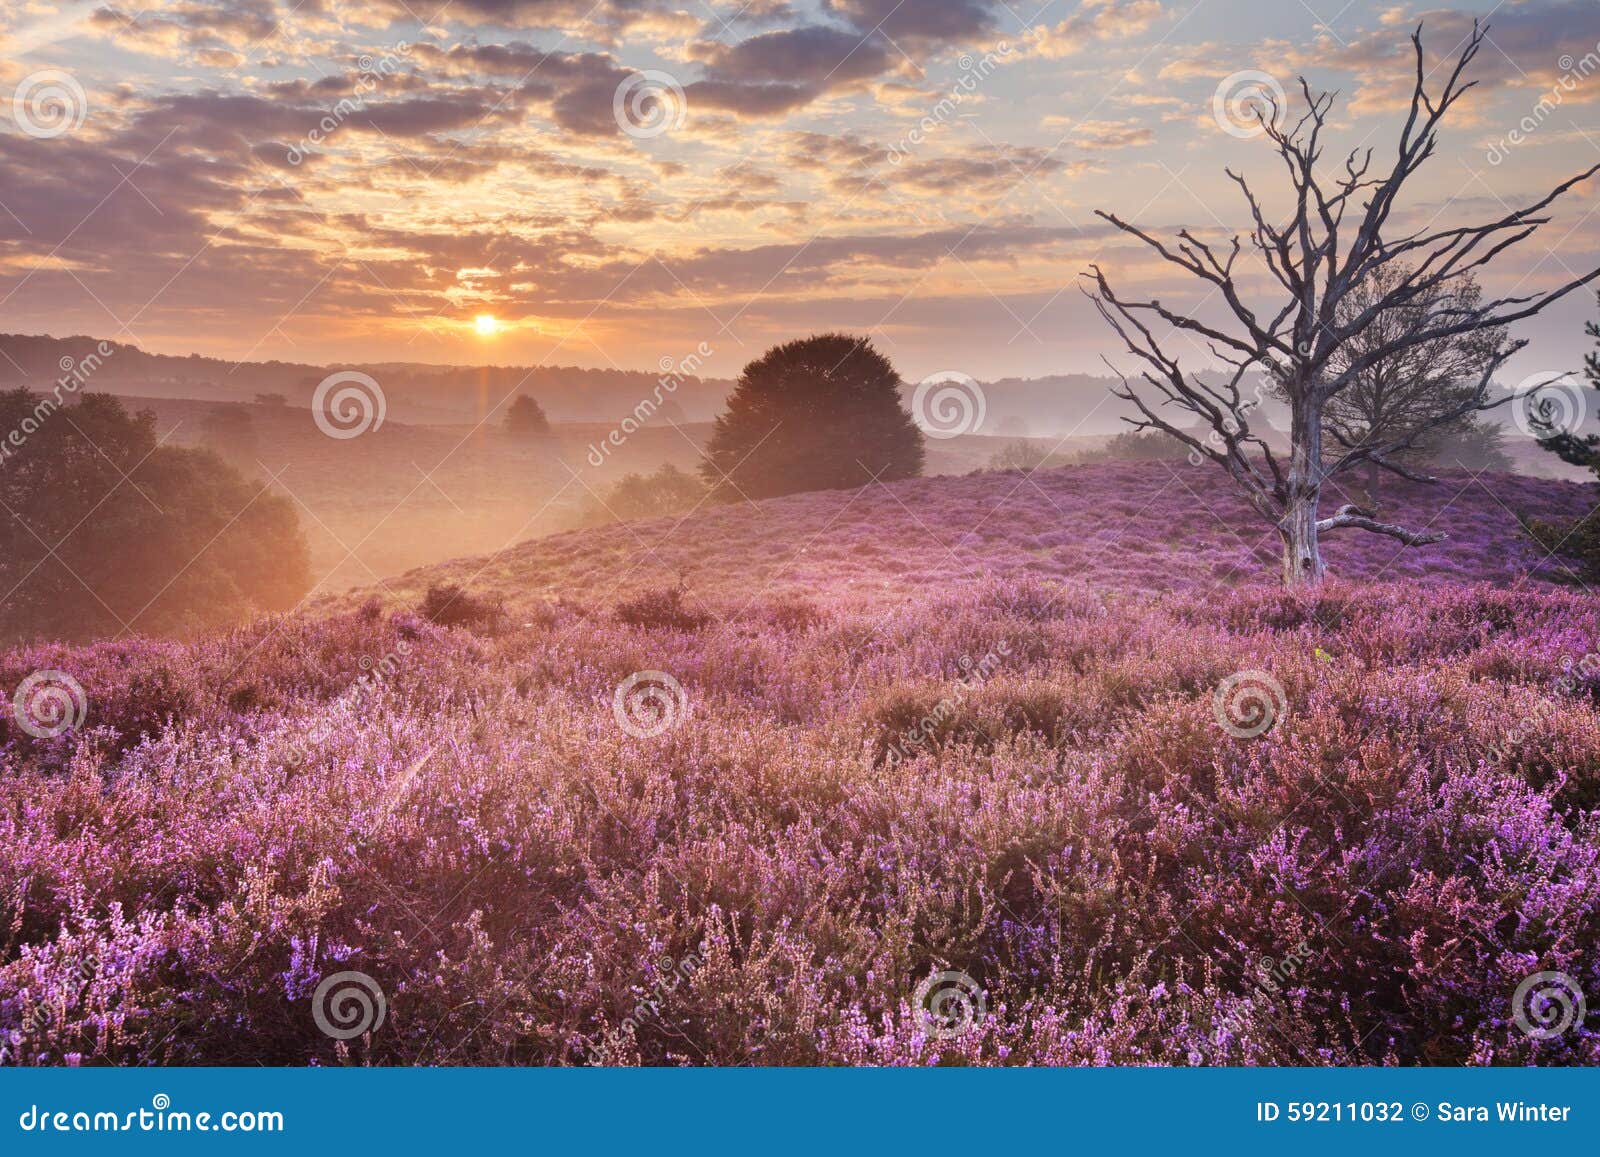 blooming heather at sunrise, posbank, the netherlands